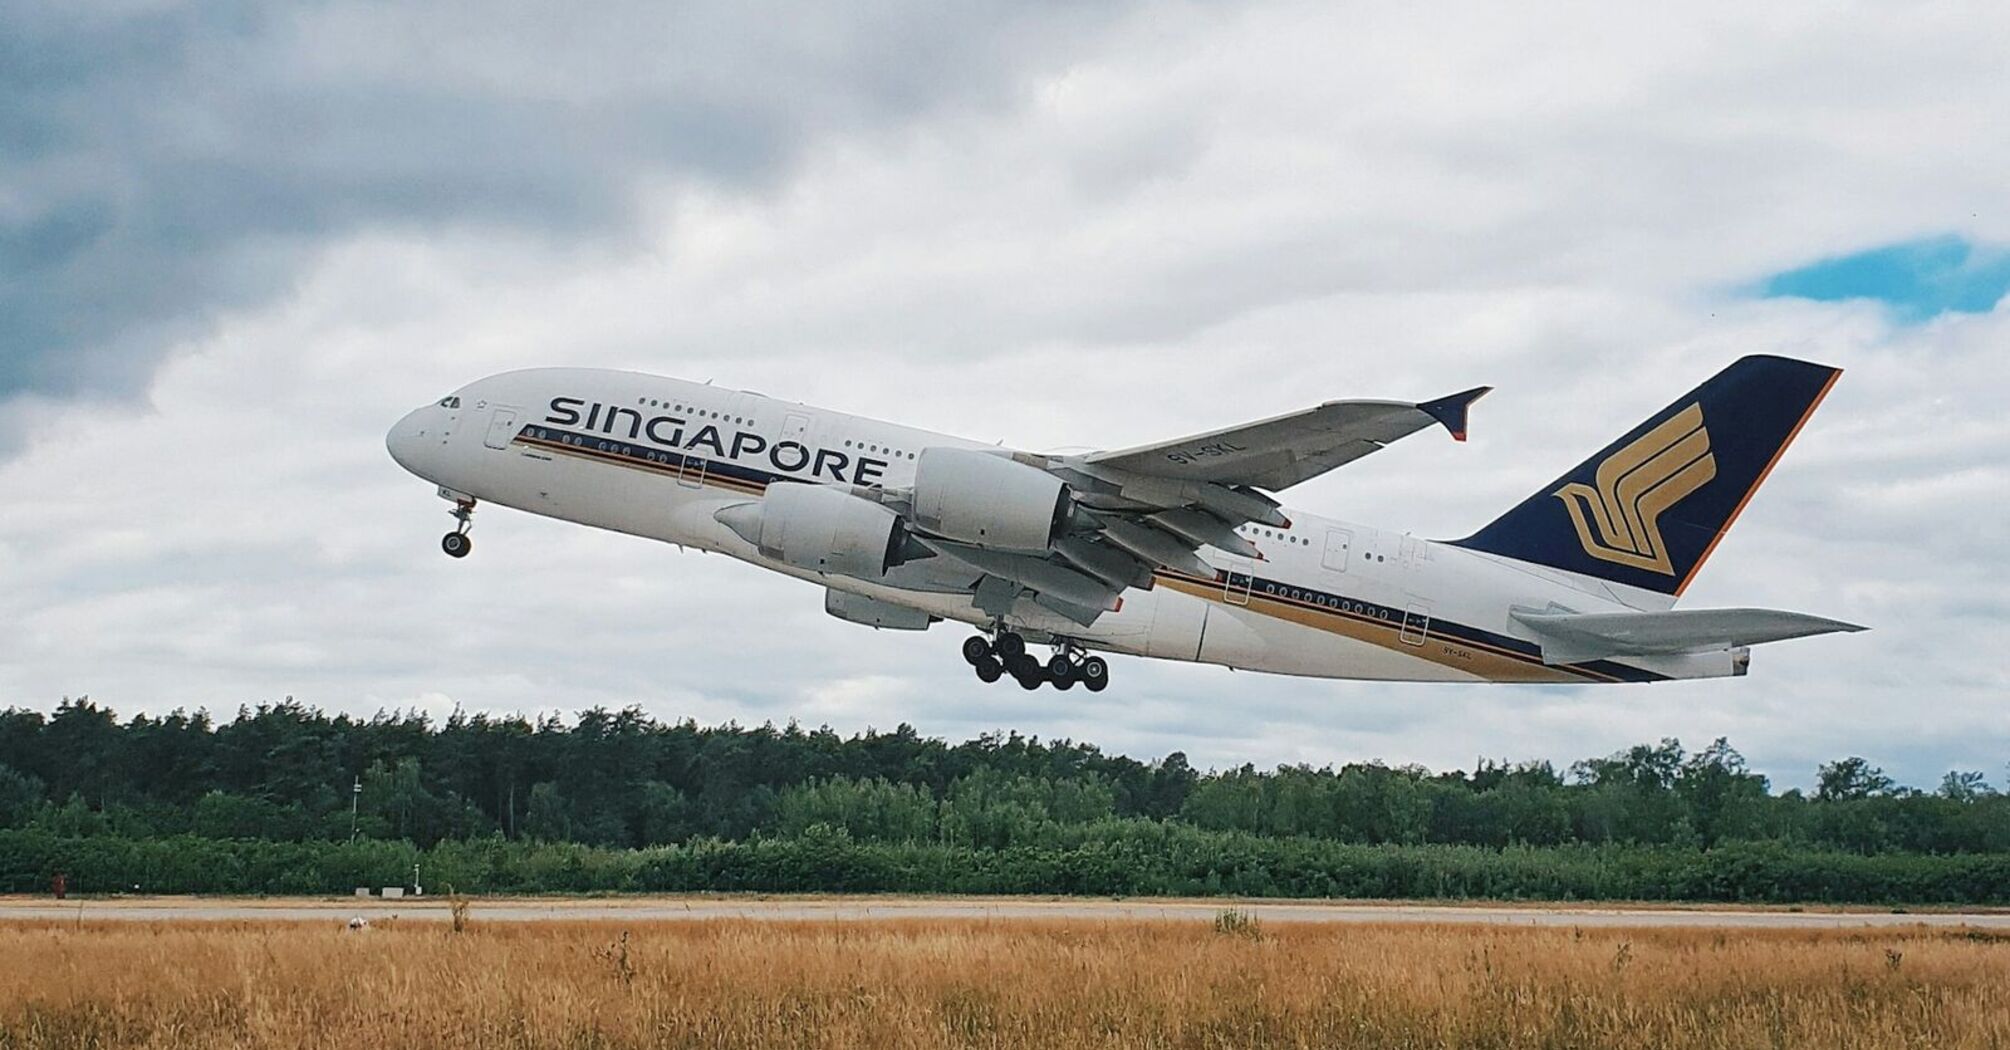 A380 of Singapore Airlines leaving to Singapore